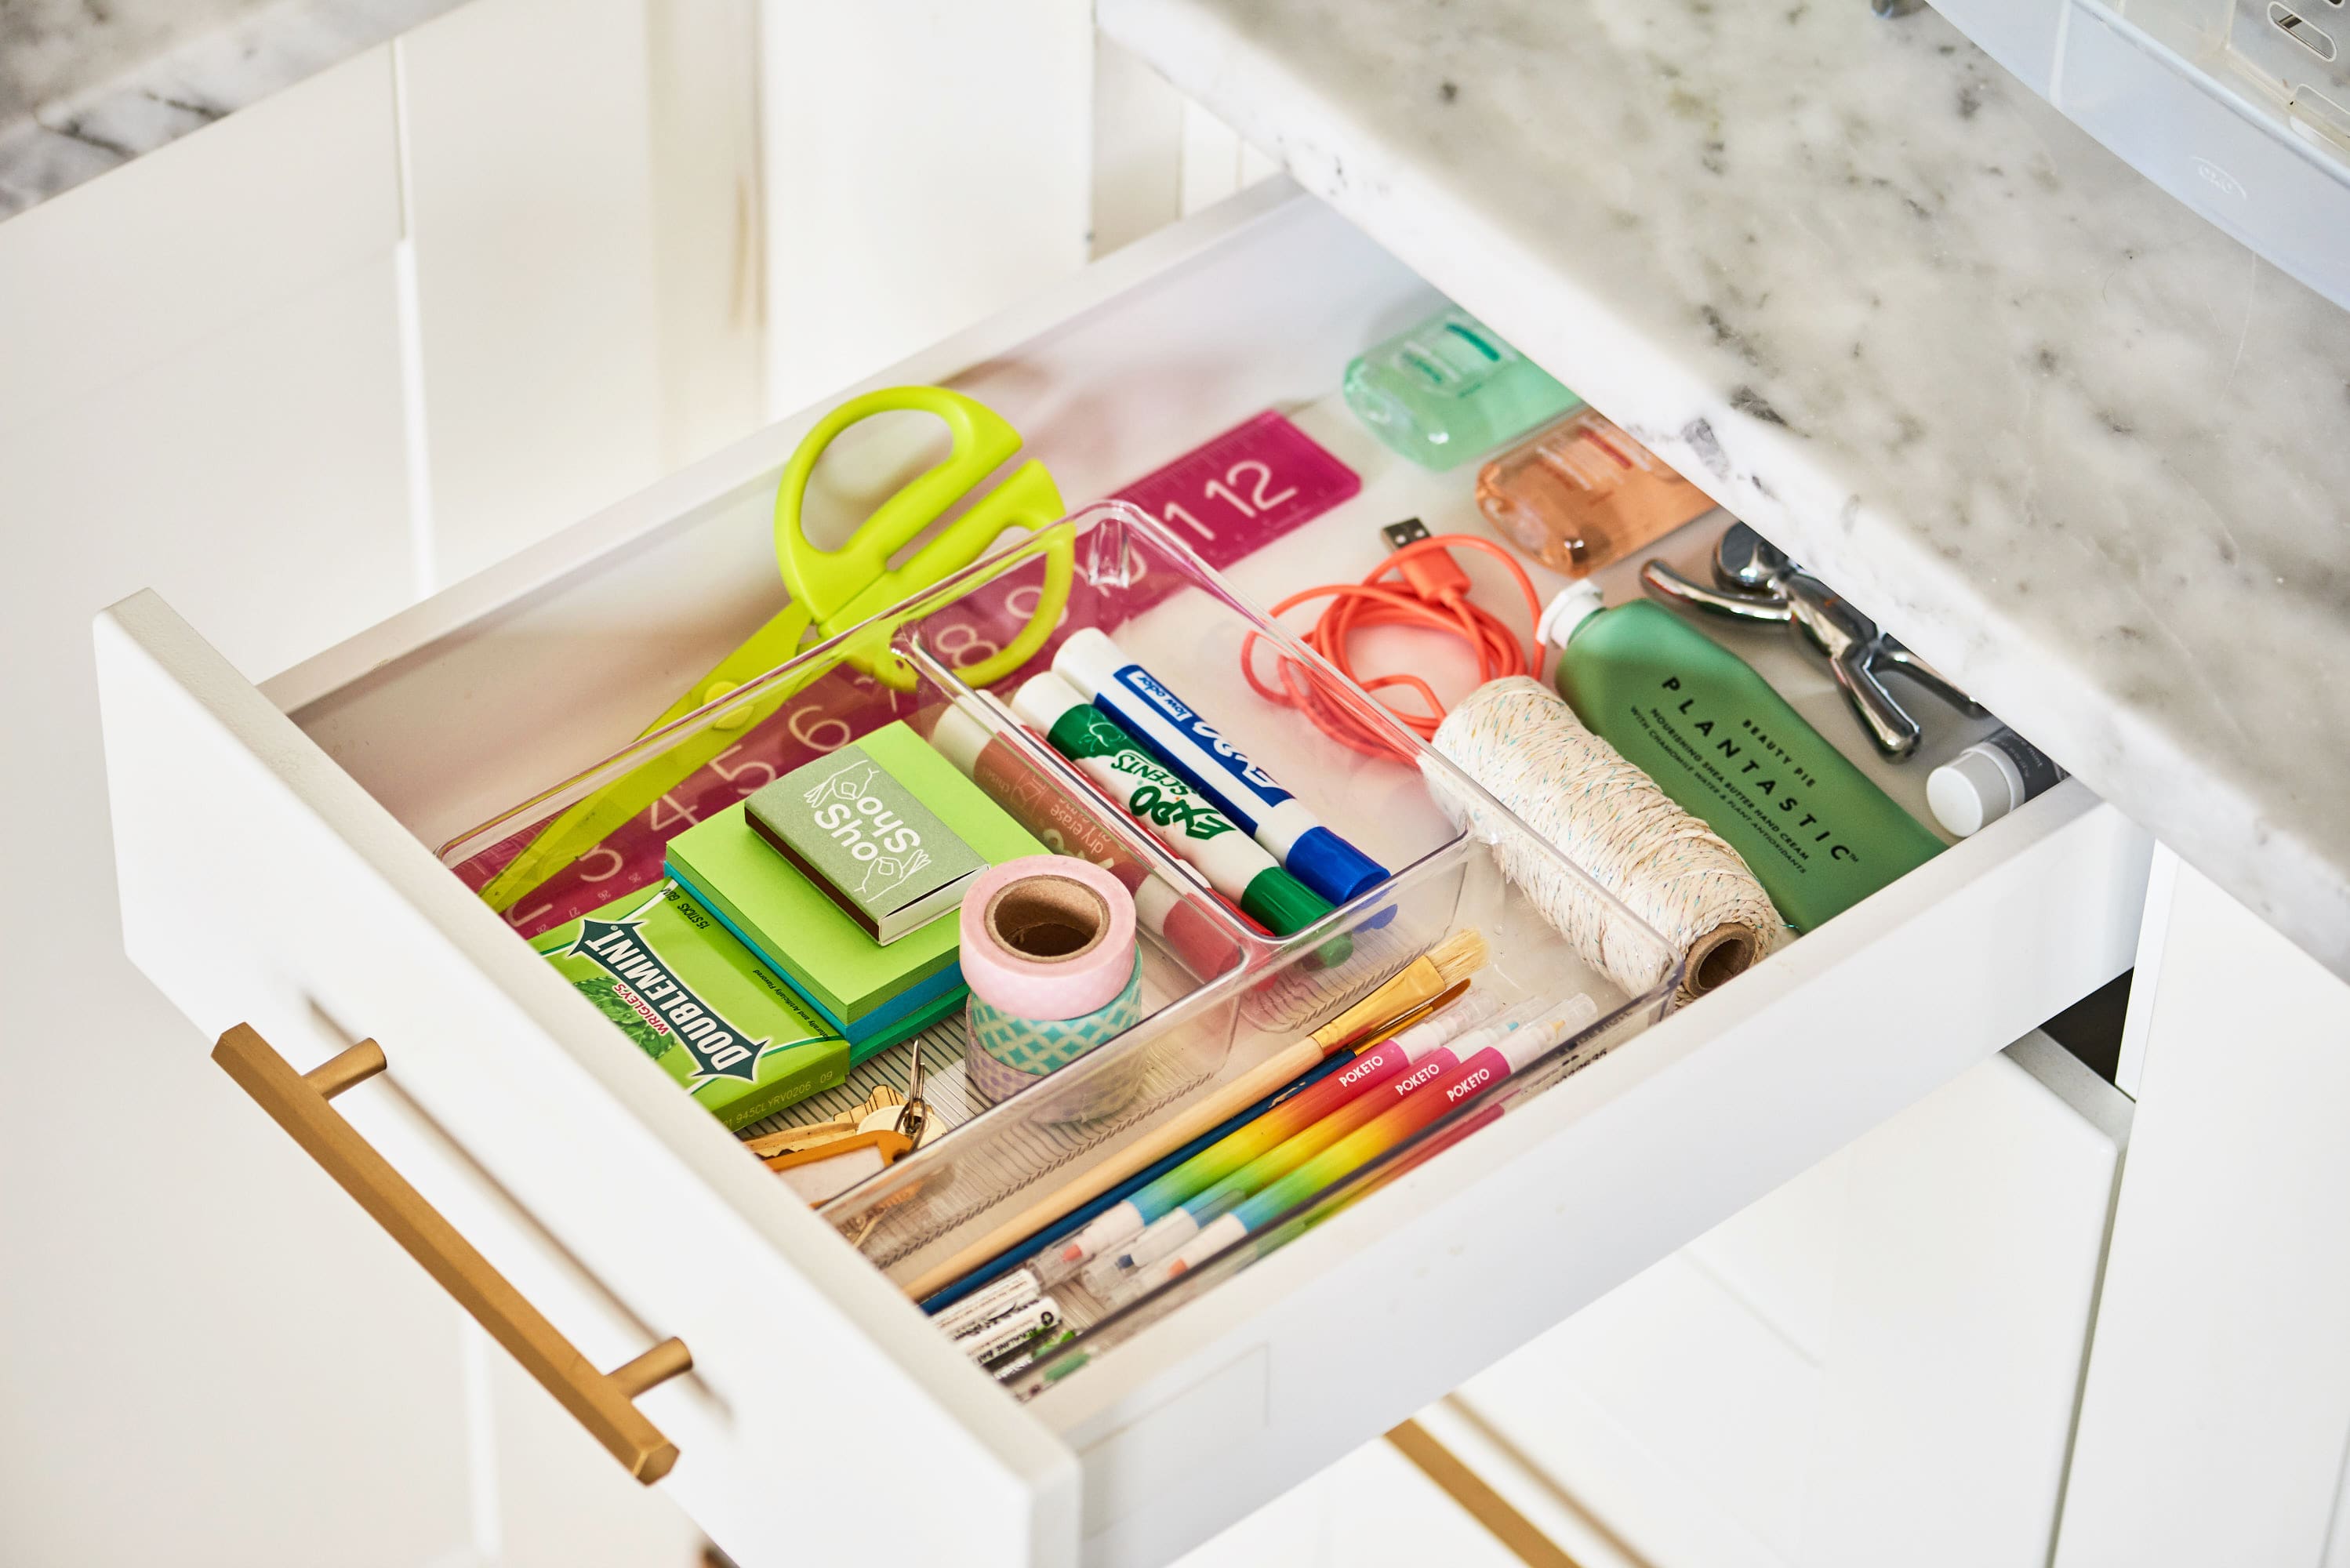 How To Organize A Junk Drawer